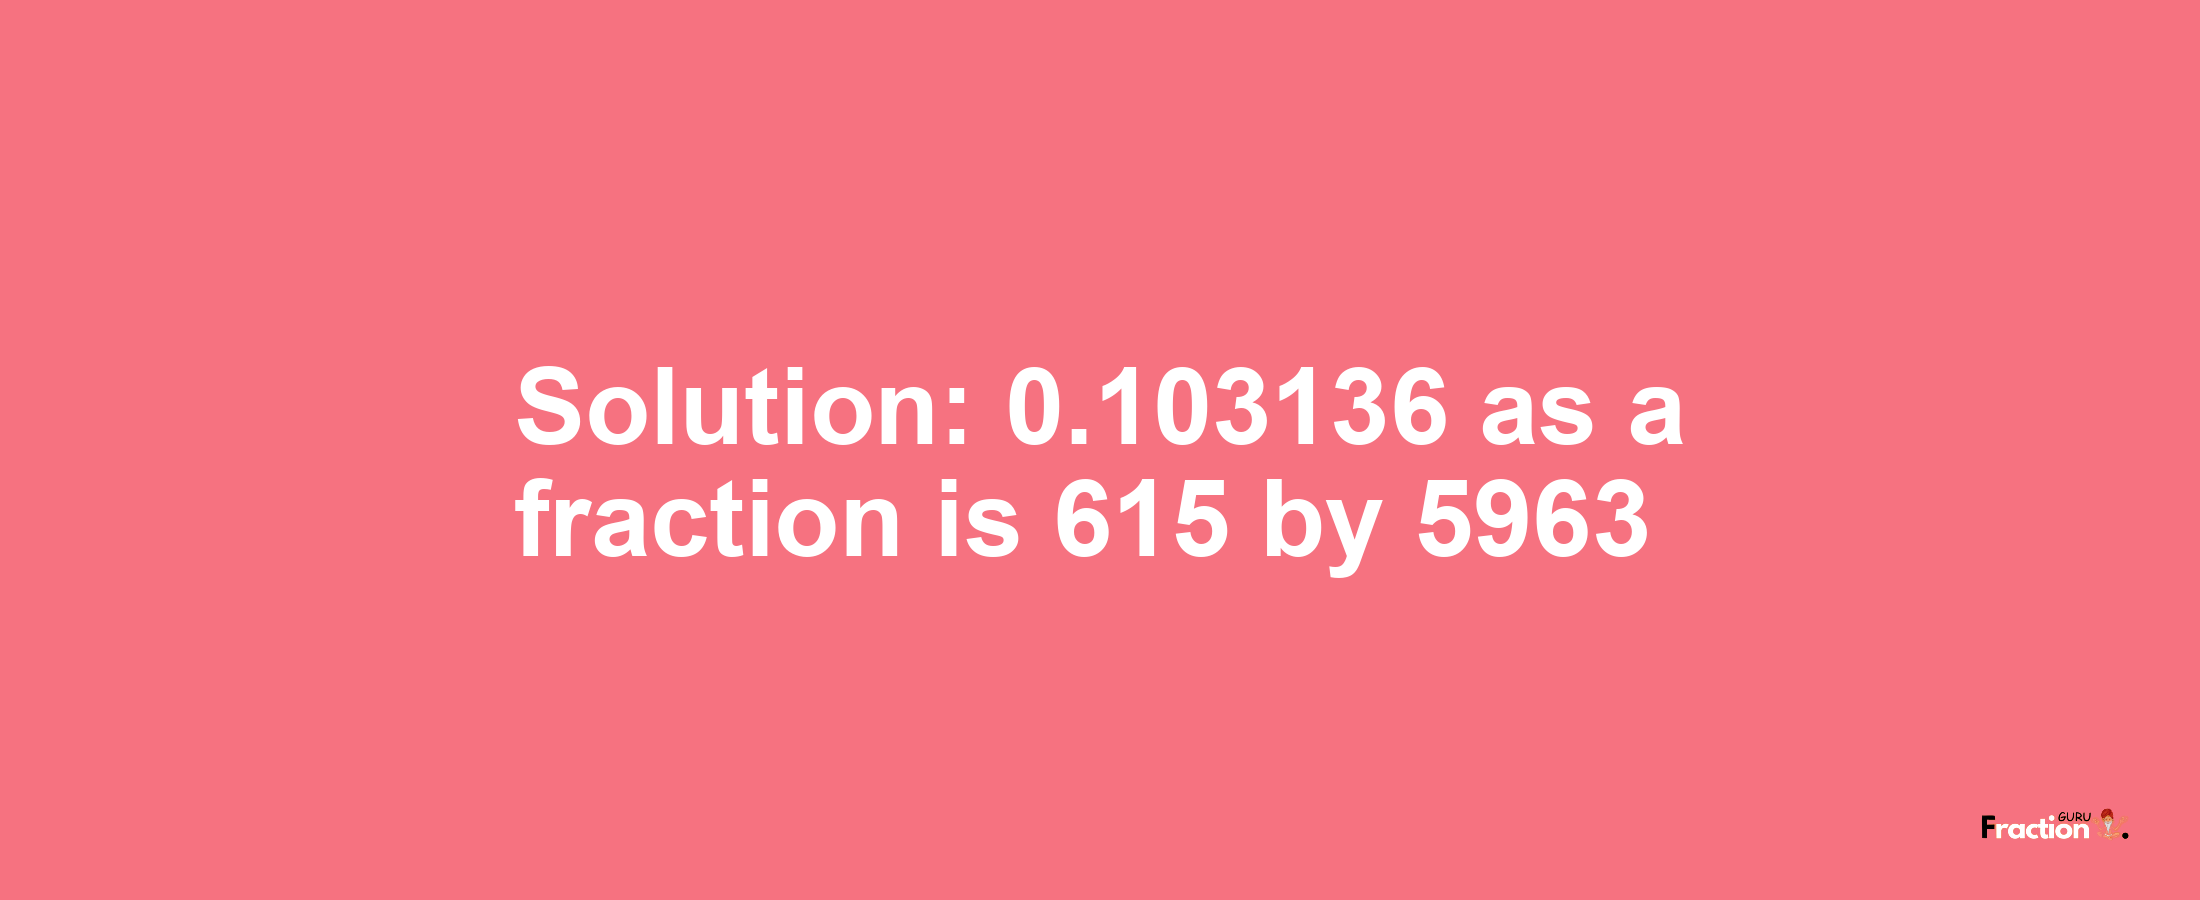 Solution:0.103136 as a fraction is 615/5963